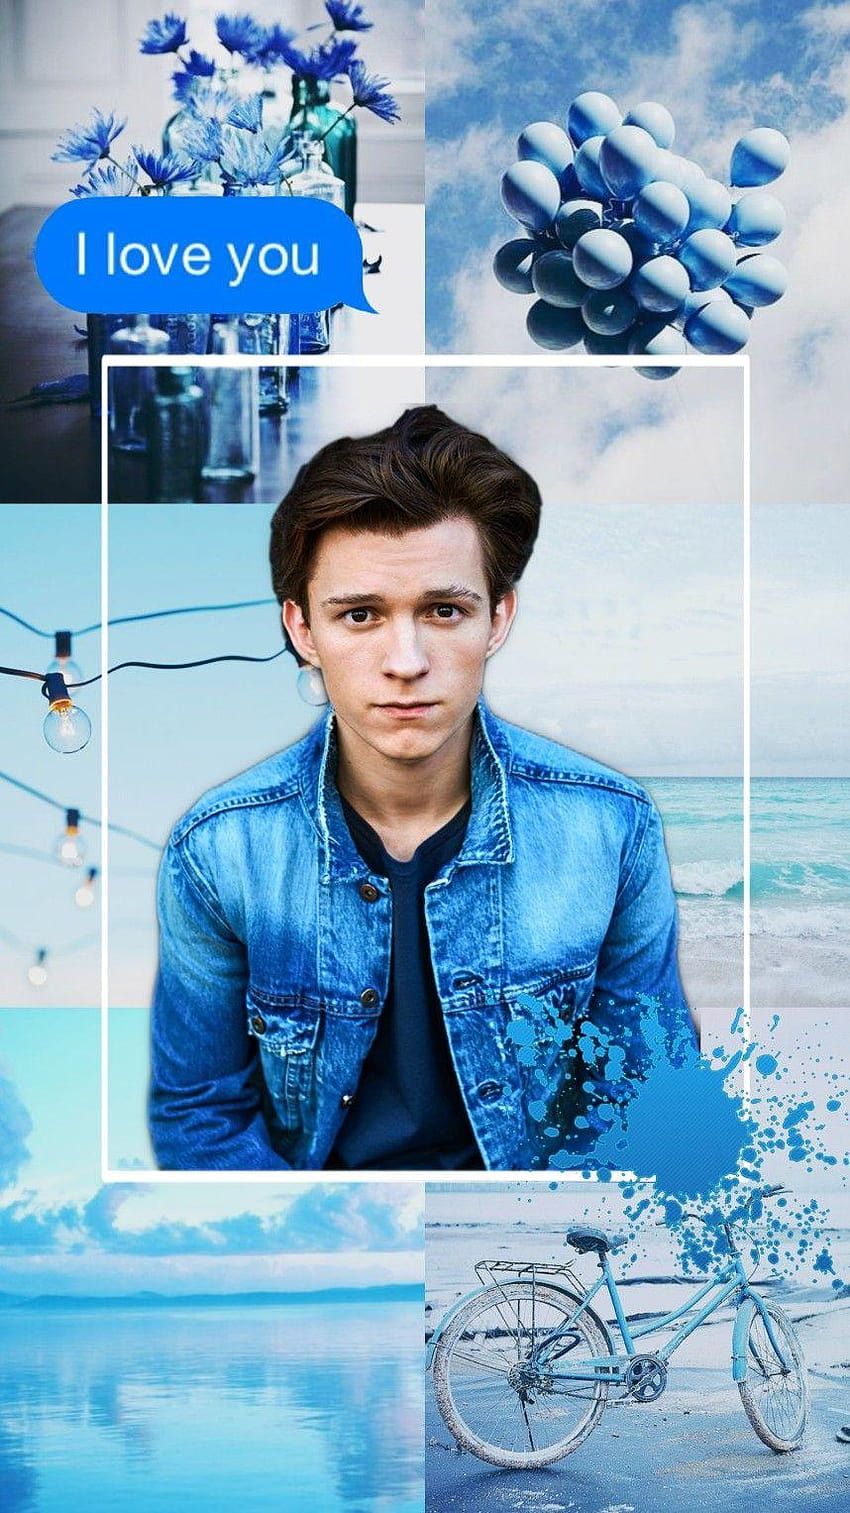 Tom Holland Aesthetic Iphone Wallpaper with high-resolution 1080x1920 pixel. You can use this wallpaper for your iPhone 5, 6, 7, 8, X, XS, XR backgrounds, Mobile Screensaver, or iPad Lock Screen - Tom Holland